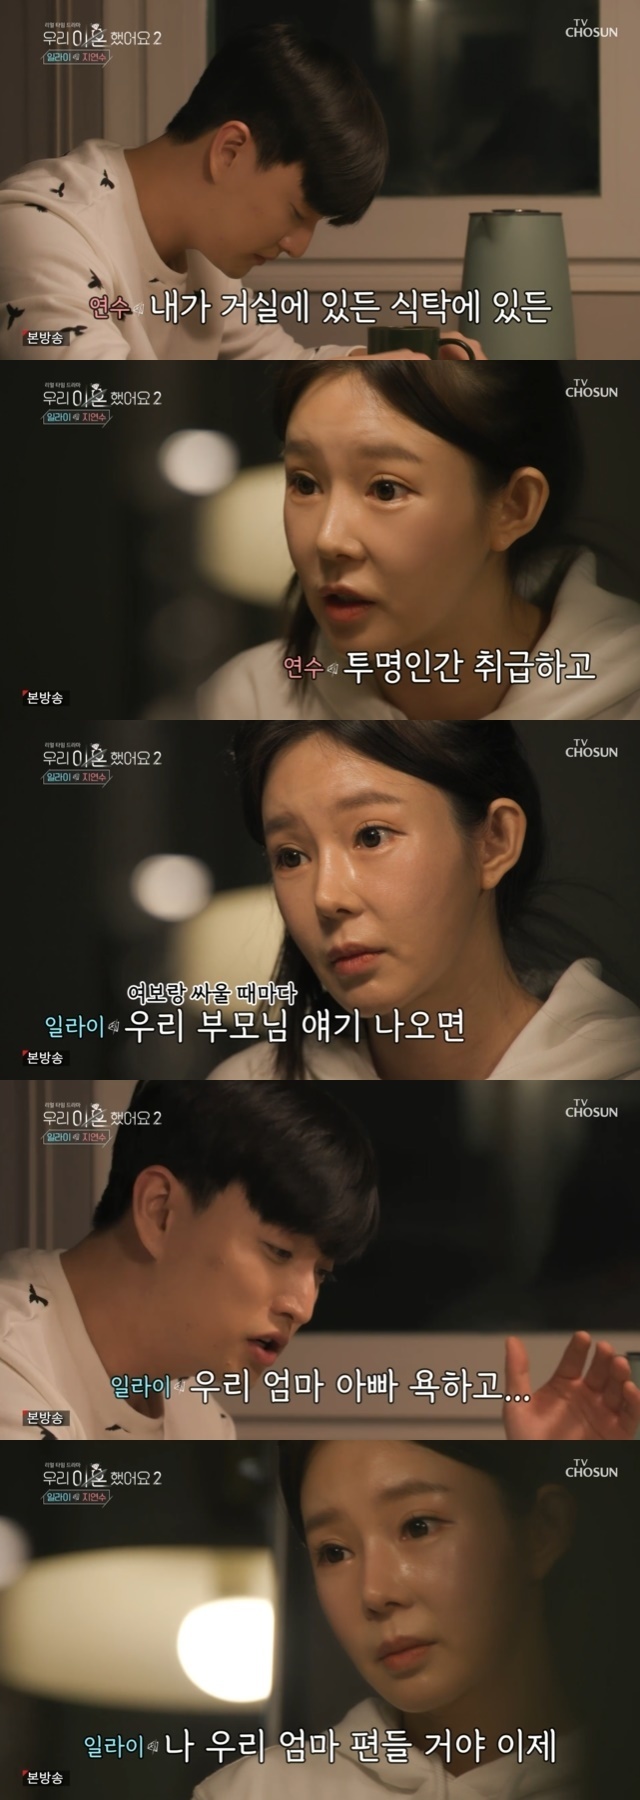 Did you treat me as a person? No, I was an ATM to your family. It was a bitter bitter and I was a toilet.It was your home AI Robots, and the Housemaid you didnt have to pay for.Conflicts headed to the extreme, with Eli grabbing Dont swear at our parents in Ji Yeon-soos anger.In the first episode of the TV Chosun entertainment We Divorced 2 (hereinafter referred to as We Got Divorced), which was first broadcast on April 8, Ji Yeon-soo and Eli, who suddenly divorced in 2020, made The Slap in two years.Ji Yeon-soo, a racing model, and Eli, a group U-Kiss, overcame their 11-year-old age difference when they were 32 and 21 and started a secret relationship.He then became a legal couple after a secret marriage report in 2014, giving birth to a lovely son Minsu in 2016 and a formal wedding in 2017.But they suddenly announced a divorce in 2020.Ji Yeon-soo, who has claimed to have been notified by phone about his divorce with Eli.Ji Yeon-soo met with the production team two months ago and told more details.Currently, Ji Yeon-soo is a credit delinquent who owes Eli about 125 million won with child support but did not receive alimony.Ji Yeon-soo burst into tears when the story about Eli came out, saying, I tried to understand even if he wanted to divorce.He was so young in his twenties he lived as someone told him. Suddenly he got married, became a father, needed his life. I understood.(But) when I heard that the reason for the divorce was me, it seemed that the 10 years I gave him so far were falling apart.I liked him, whether he was cursed or criticized, and he abandoned me and Minsu too easily. I can not forgive him. Eli also returned home in two years to film We Got Divorced and talked to the production crew, which revealed a sharp difference from Ji Yeon-soo.Eli confessed that he had had frequent quarrels with Ji Yeon-soo during his marriage, claiming that I never informed (divorce).Eli said, (Ji Yeon-soo) says that he was married, but I can not confirm it. Its different from the story of his mother and the training.I told my mom, Dont do it. I just brought her a side dish. She said she was married to me.Your parents are bad people, he said, and I make a distance between me and my parents.Eli said that while fighting over this issue, Ji Yeon-soo told us to stop at the airport on the day he left United States of America for Korea over paperwork.There was a cold air between the two Slap people, and even MC Shin Dong-yeop, Kim Won-hee, and Kim Sa-rom are hard to see.Eli wanted to talk to Minsu as much as he wanted to see Son Minsu living with Ji Yeon-soo, but Ji Yeon-soo did not change Eli even when Minsus phone was called.Eli said, So did you tell Minsu that I threw it away? And revealed the emotional goal of the son.Of course, there were many stories that Ji Yeon-soo had also made: Ji Yeon-soo first talked about Elis absence on the day of the divorce ruling.Ji Yeon-soo said, But should not you be polite to those who have lived for nearly 10 years? I can understand that Friend who bought together greets you even if you take out your baggage.If you do not like people, you do not have an answer. I understand that, but I have lived for nearly 10 years.Eli was talking about money, saying that he had no money to come to Korea at the time. Eli said, I still do not know why I asked for a divorce.He was a total beggar in Korea. Thats why you went into United States of America. I didnt want to live next to my parents.But what did Ji Yeon-soo tell my parents, and now were all going to live together, so we have to live with them, but we have to move to a bigger house. Ji Yeon-soo then said: Ill tell you exactly.When we entered United States of America, your mother would give you three to live in an apartment near the restaurant.And I said Id let you work. I went and changed. Just move. Our familys canceled. I dont have a job. I understand.I was sad because I said, Ill go clean up. (He said, You dont have a job! (He said, I know the tone of your fathers words at the moment.I understand it at first, but if I get dissatisfied, I will be sad later. I was just there alone, treating me as an invisible person, telling me, and not answering, whether I was in the living room or at the table.I was also tough at United States of America, he said.Eli said: I think weve been getting married and then weve been getting a lot of honey.Whenever I fight my mom and my parents talk, (Ji Yeon-soo) swears my mother and swears Father, he said.However, Ji Yeon-soo said, 95% of the reasons we fought during our marriage are all mothers. Elis mother told her that she was divorcing Eli and making her part.The fact that there is a high-level conflict in the issue of Ji Yeon-soo, Elis divorce became even more stark.I dont believe that, Eli said, whenever I was in Japan, you told me if I had trouble with my mom.Im only separated from my mum, what do I do in the middle? When I come out for a separate collection, shes angry (Ji Yeon-soo): Whats wrong?When I asked, she said, Were poor son. I can go there and say, Whyd you do that? Im not even here.How did I make things better there? Ji Yeon-soo told Eli, I wonder, I am a precious child in my house, and I am precious to my friends.Why should I not be human to your family? I treated you. No, I was an ATM. Emotional trash.It was your home AI Robots and The Housemaid, which you can not pay for. Do you have anything to say? Ji Yeon-soo claimed: Youre a good parent but for me theyre worse than crooks, Im a victim.